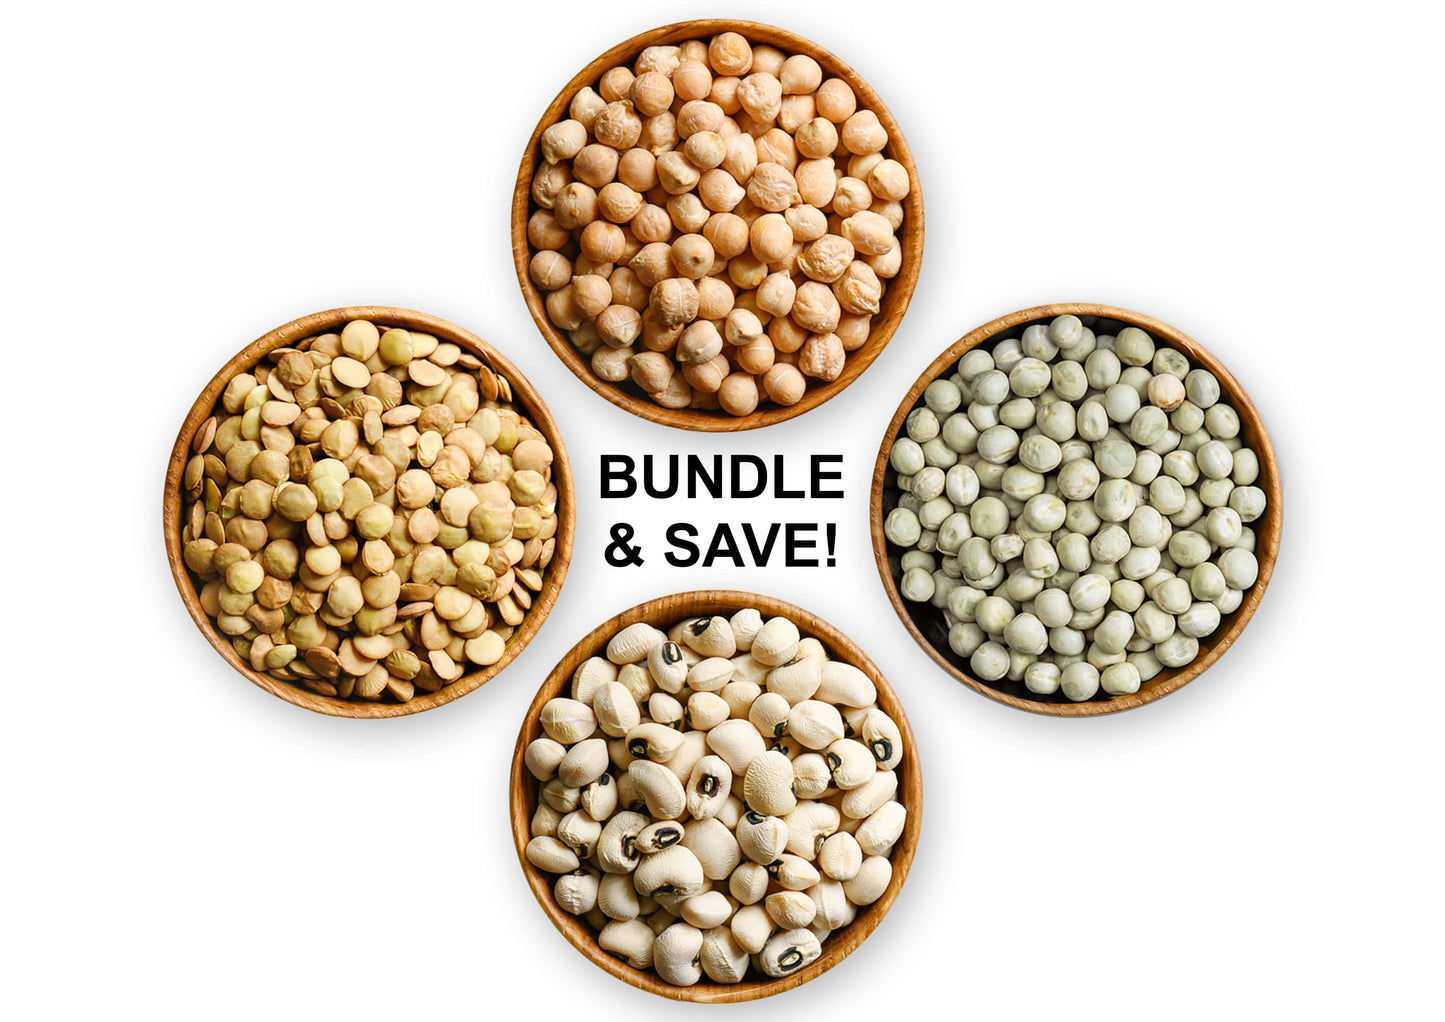 Premium Pulses Bundle, 4 Pack – Chickpeas (5 LB), Whole Green Peas (5 LB), Green Lentils (5 LB), Black-eyed Peas (5 LB), Dried Garbanzo Beans and Legumes, Bulk, Kosher, Rich in Fiber and Protein